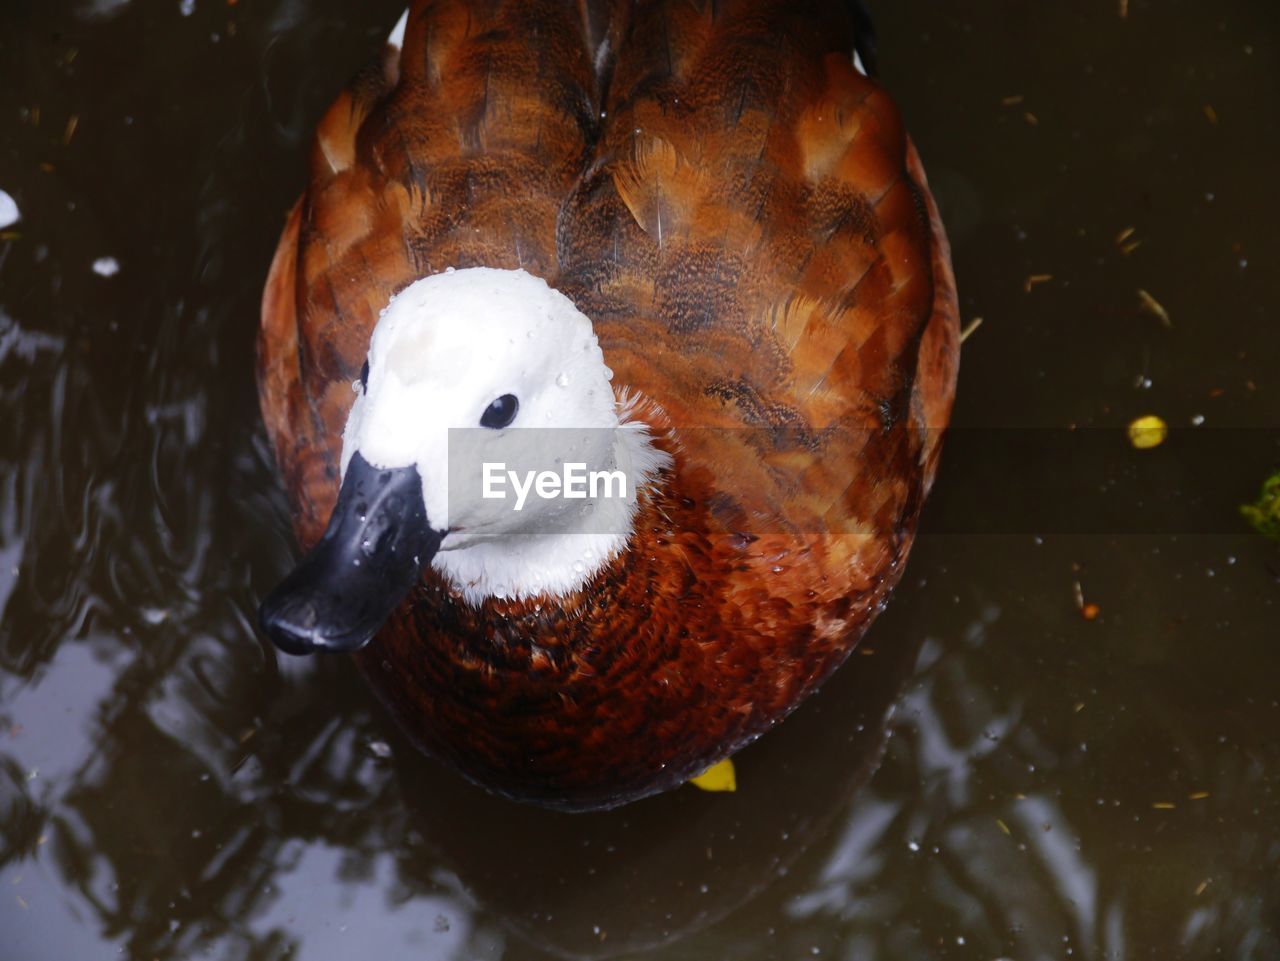 HIGH ANGLE VIEW OF DUCK IN LAKE